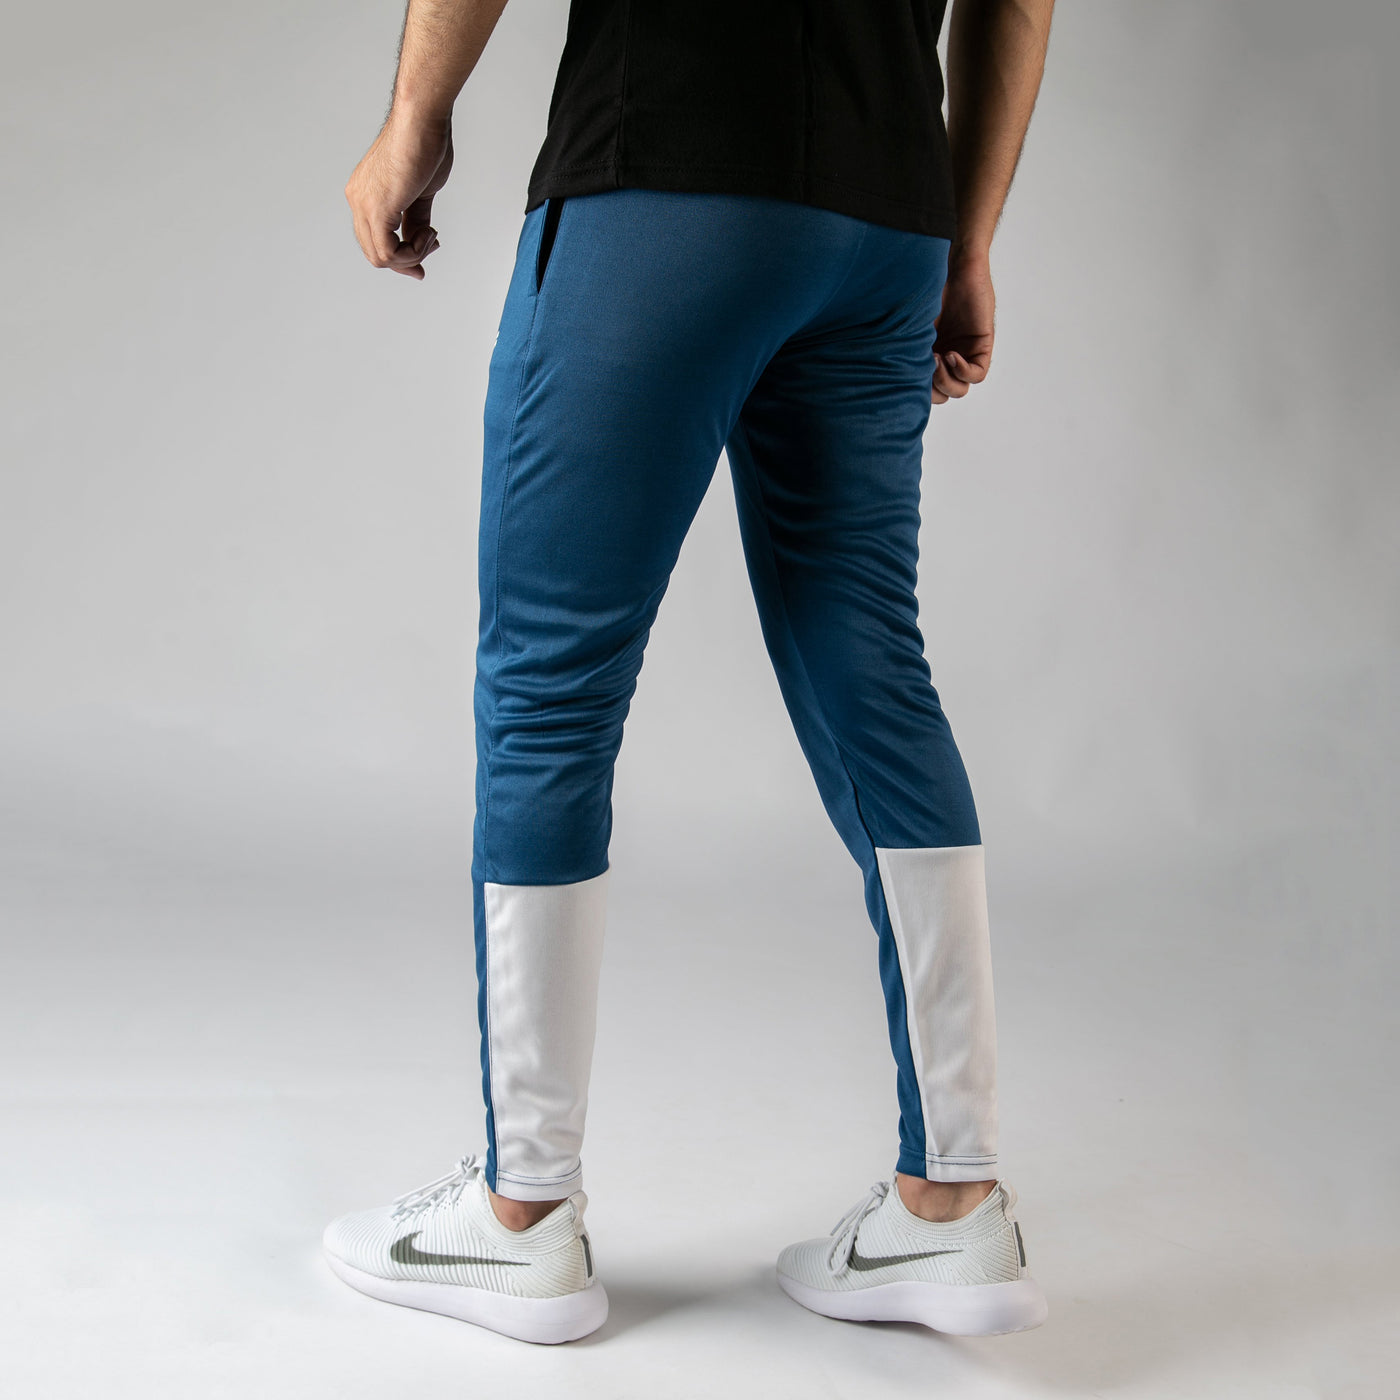 Sapphire Blue Quick Dry Bottoms with While Calf Panels